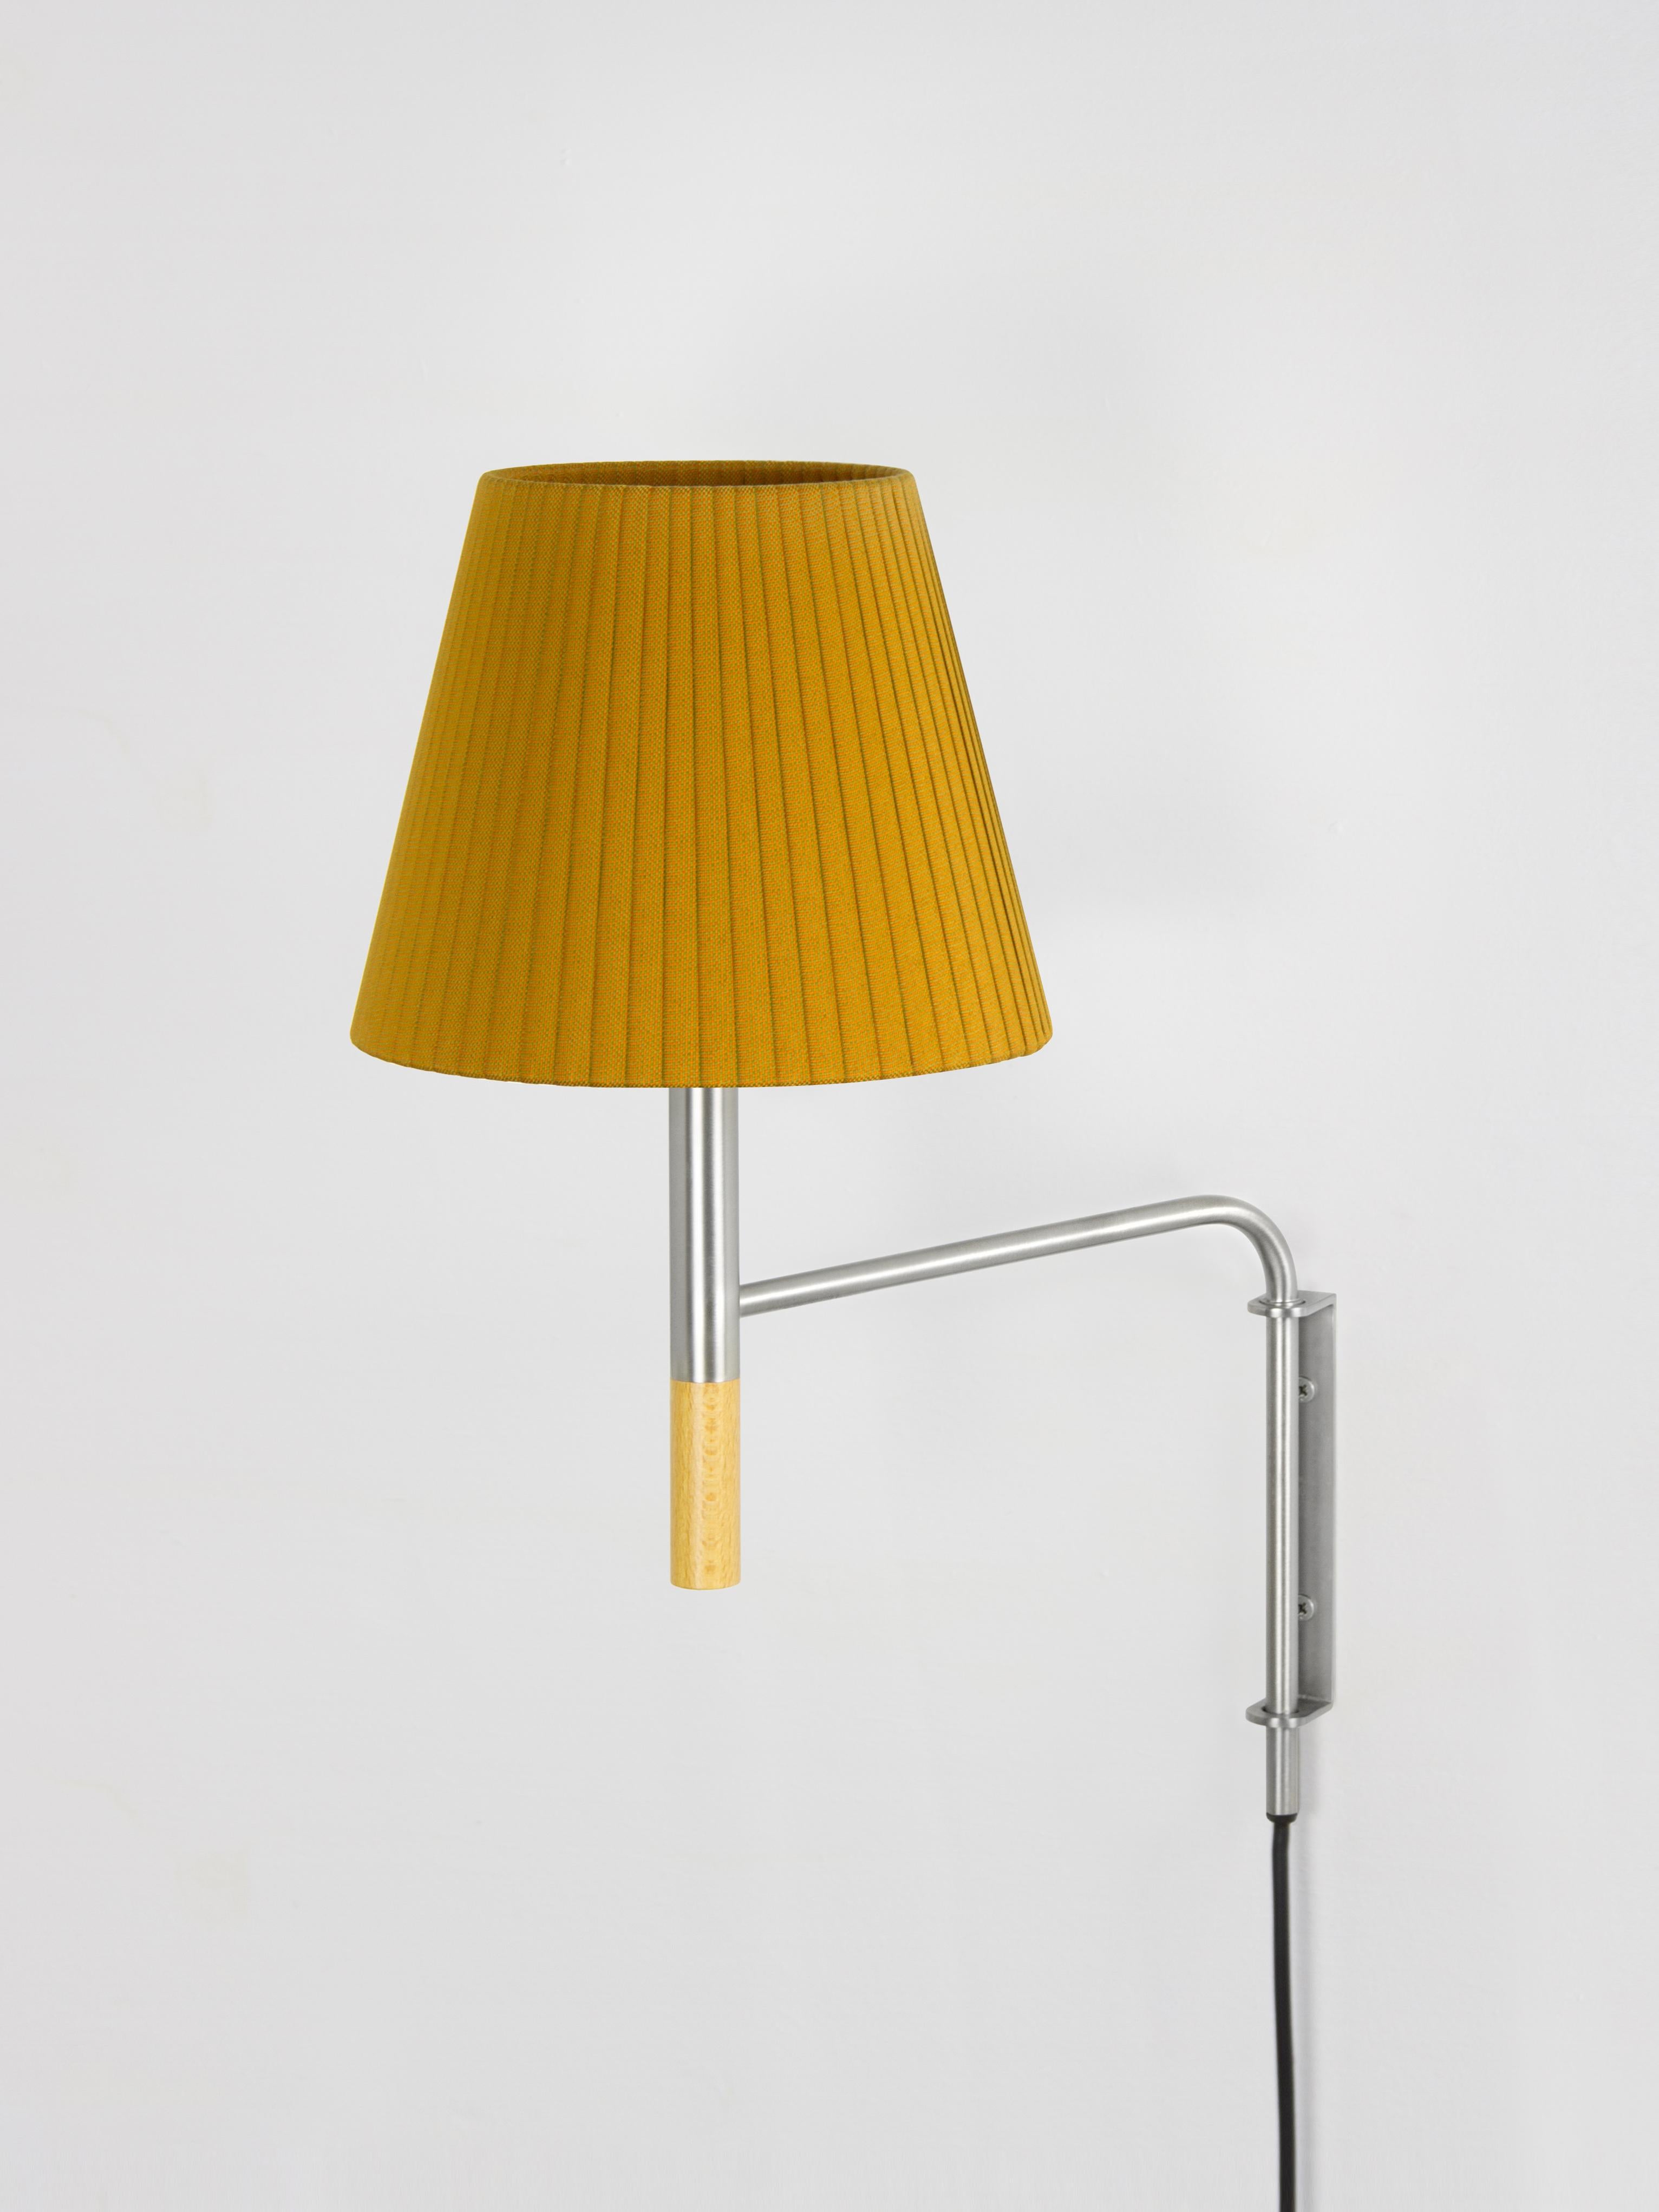 Mustard BC1 wall lamp by Santa & Cole
Dimensions: D 20 x W 35 x H 44 cm
Materials: Metal, beech wood, ribbon.
Available in other colors.

The BC1, BC2 and BC3 wall lamps are the epitome of sturdy construction, aesthetic sobriety and functional